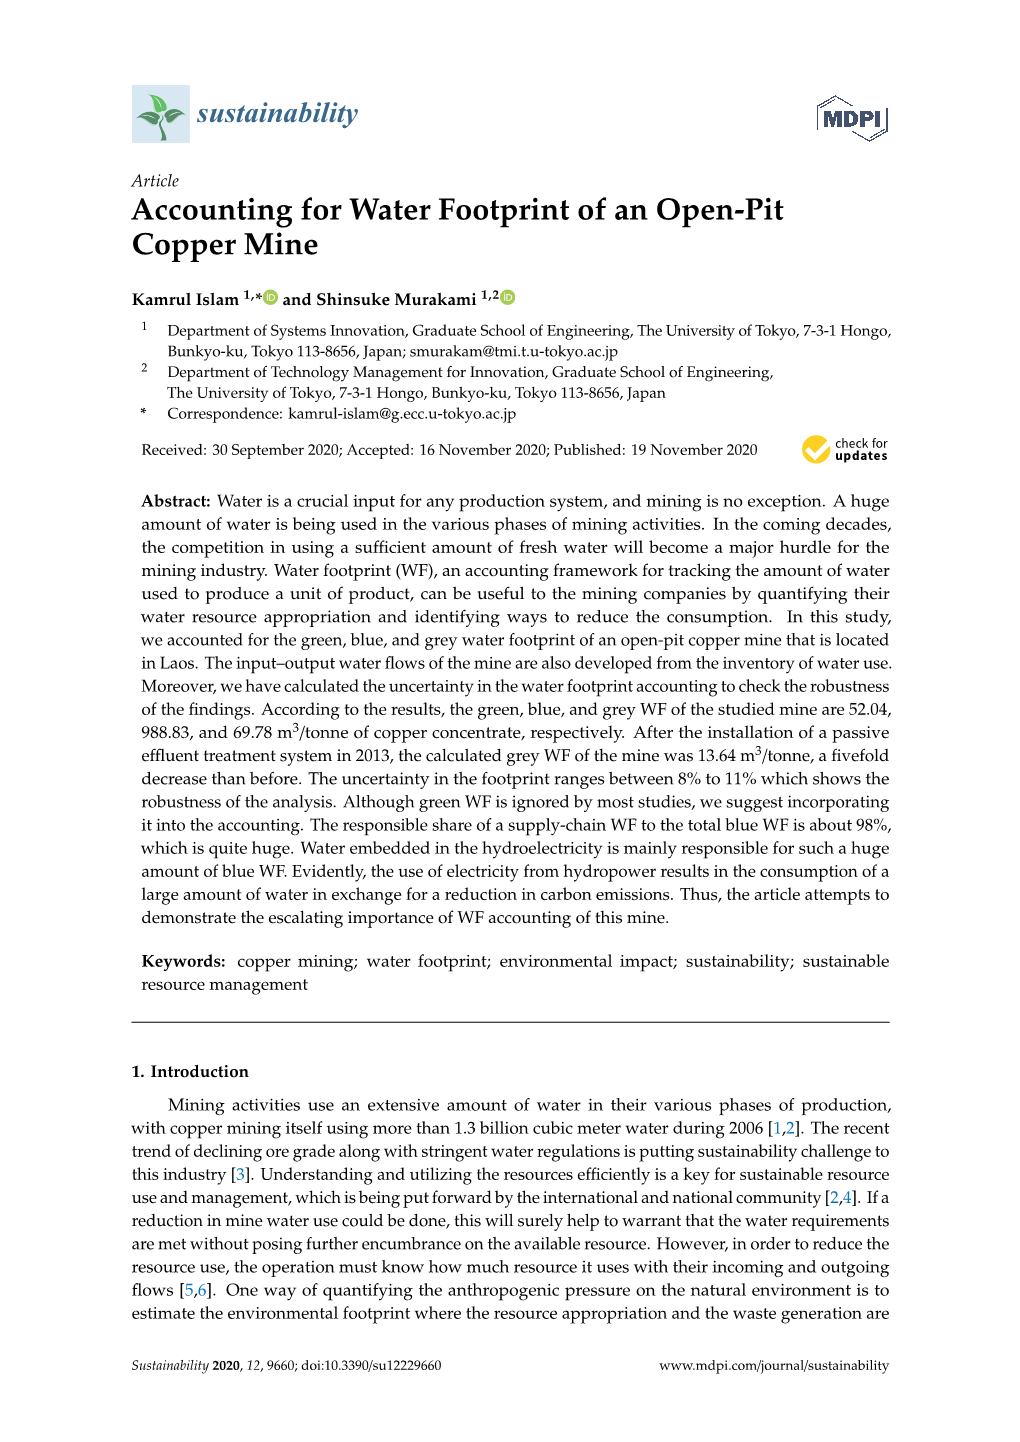 Accounting for Water Footprint of an Open-Pit Copper Mine